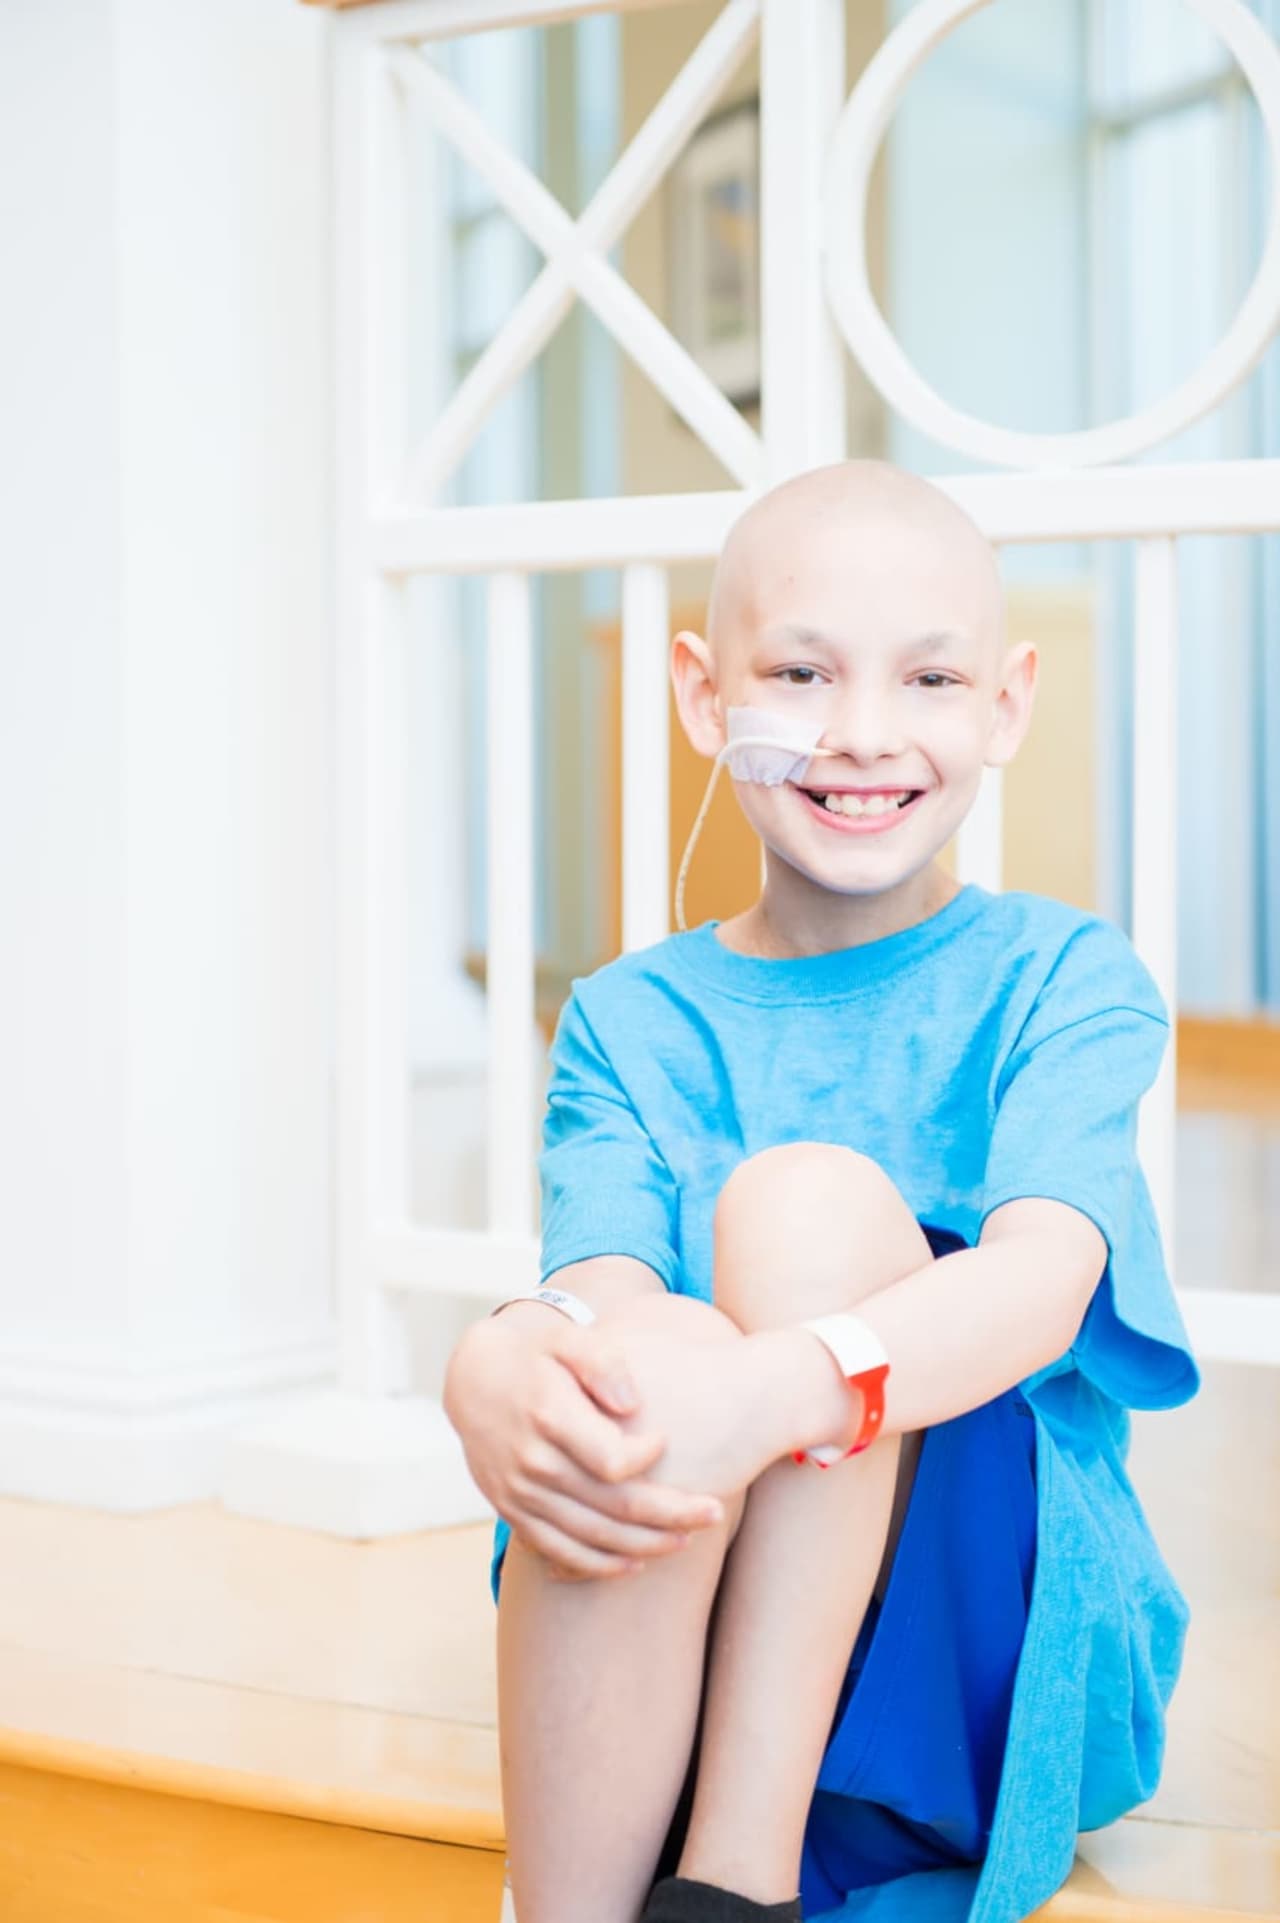 Children like Andrew, who was treated at Maria Fareri Children's Hospital for muscle cancer, will benefit from the upcoming 12th Annual Radiothon For the Kids, hosted by 100.7 WHUD.